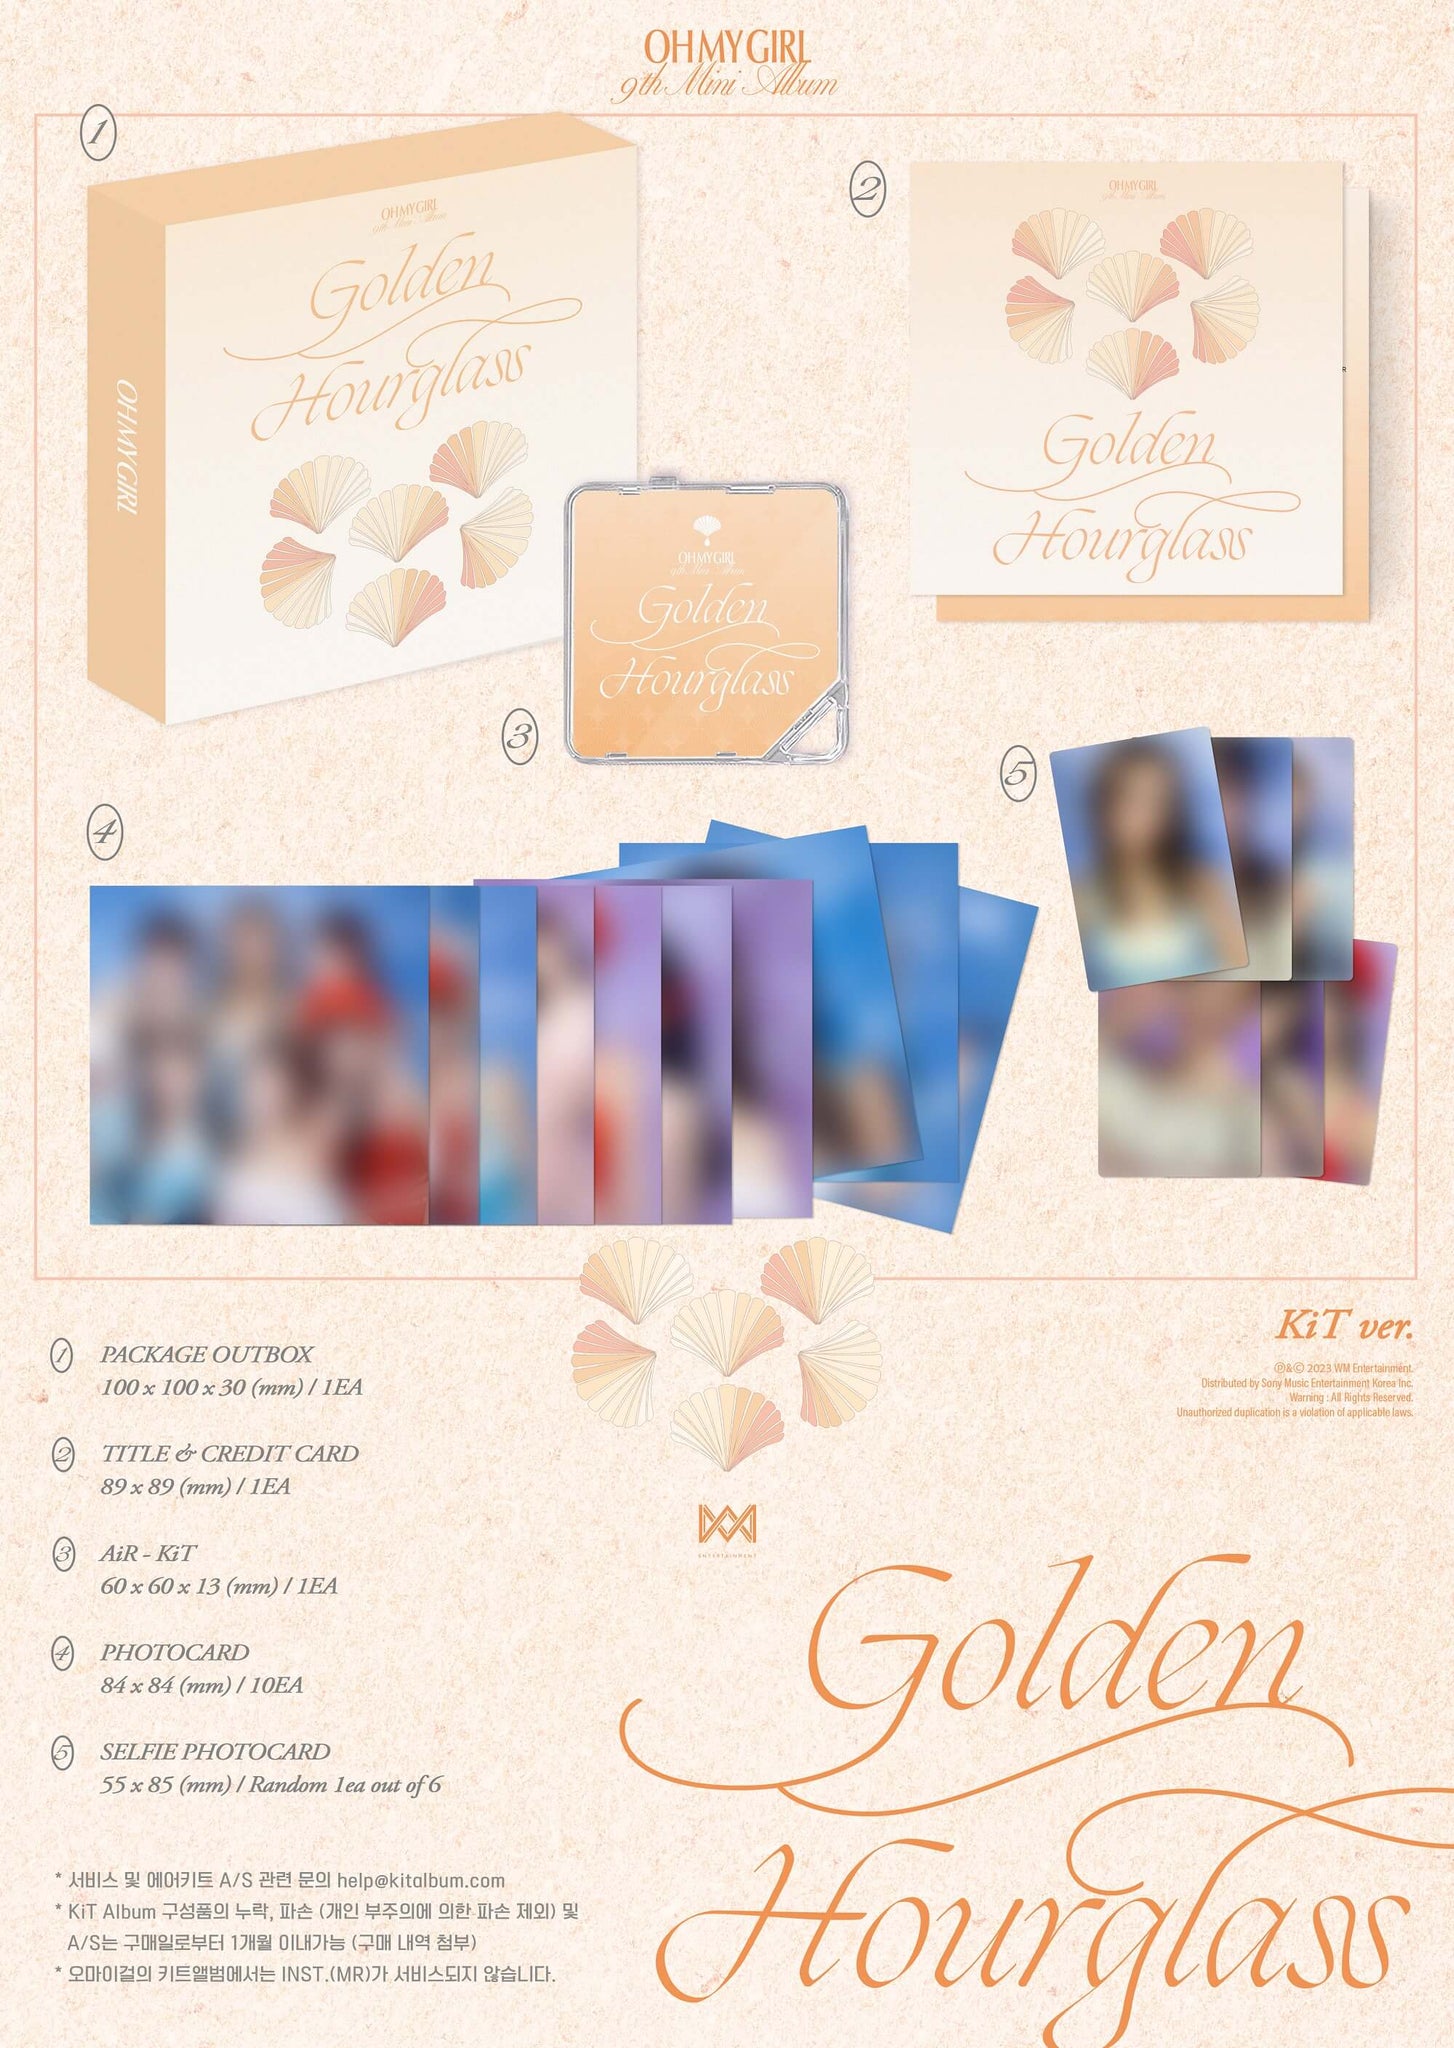  OH MY GIRL Golden Hourglass - KiT Version Inclusions Package Out Box Title & Credit Card AiR-KiT Photocard Selfie Photocard